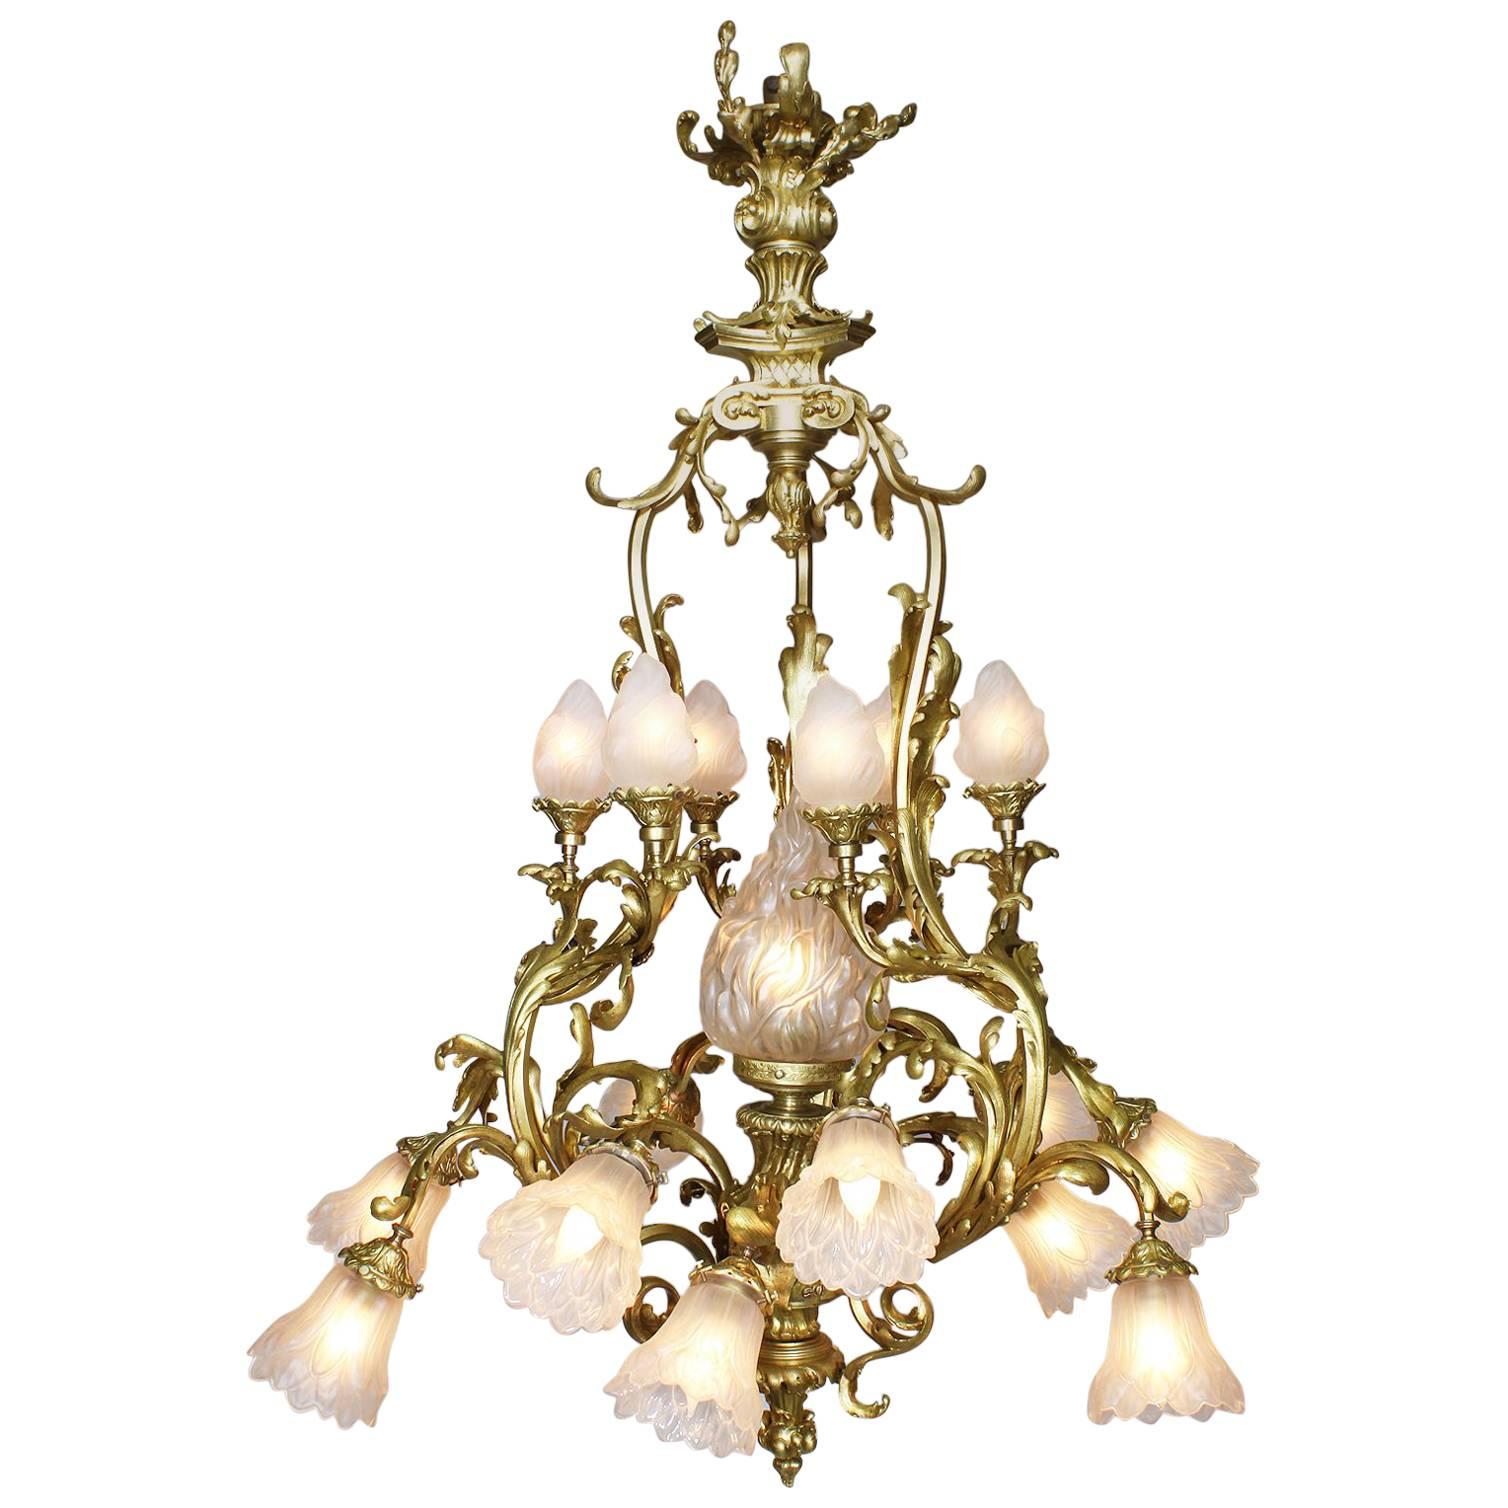 French Belle Époque Rococo Style Gilt-Bronze and Frosted Glass Shades Chandelier